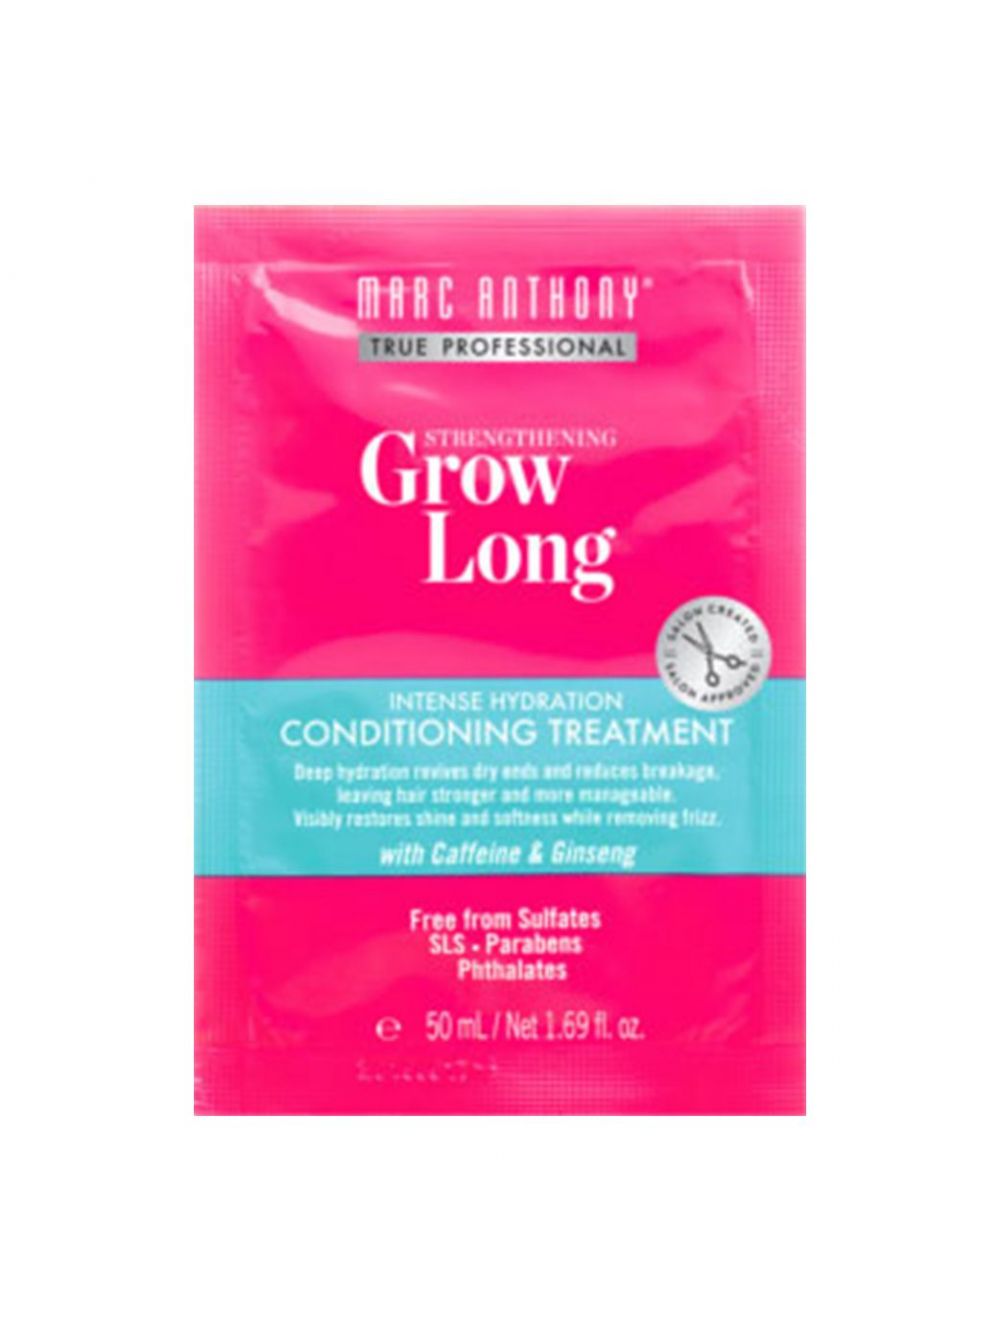 Marc Anthony Strengthening Grow Long Intense Hydration Conditioning Treatment (50ml)